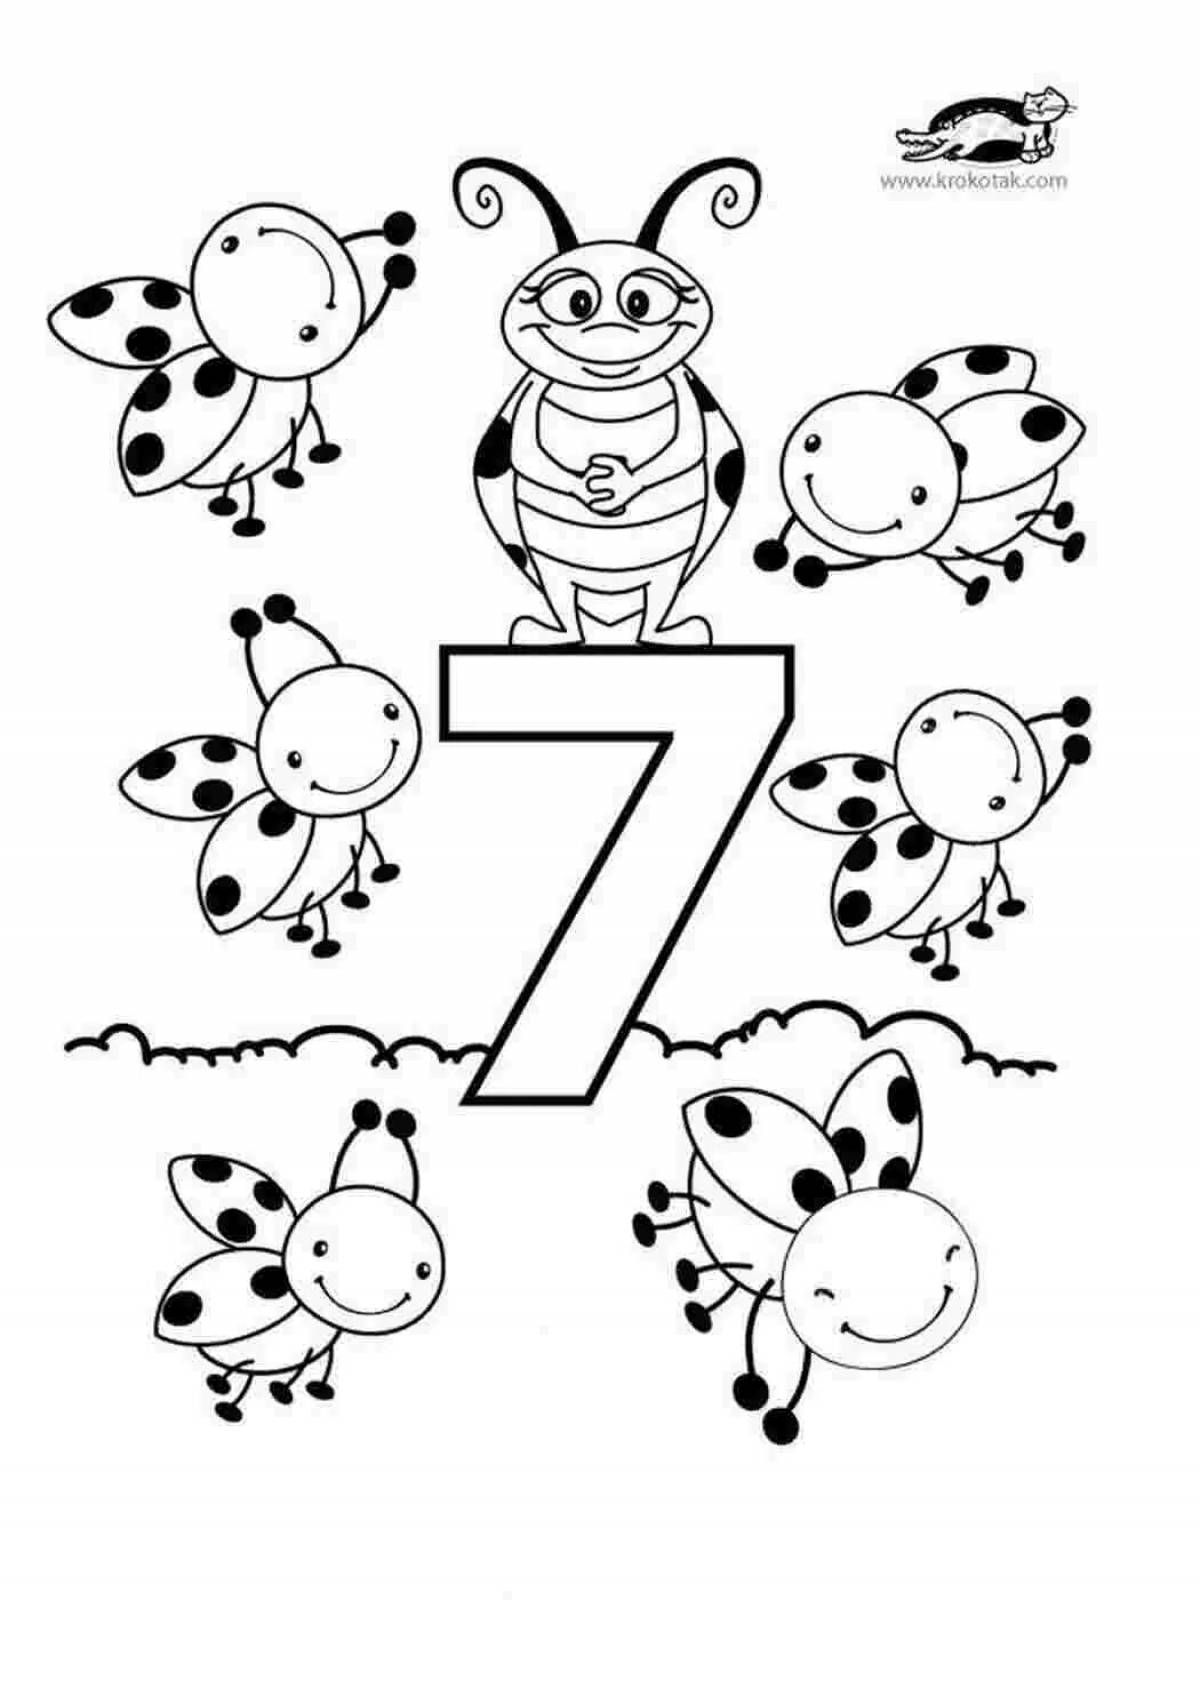 7 for kids #13